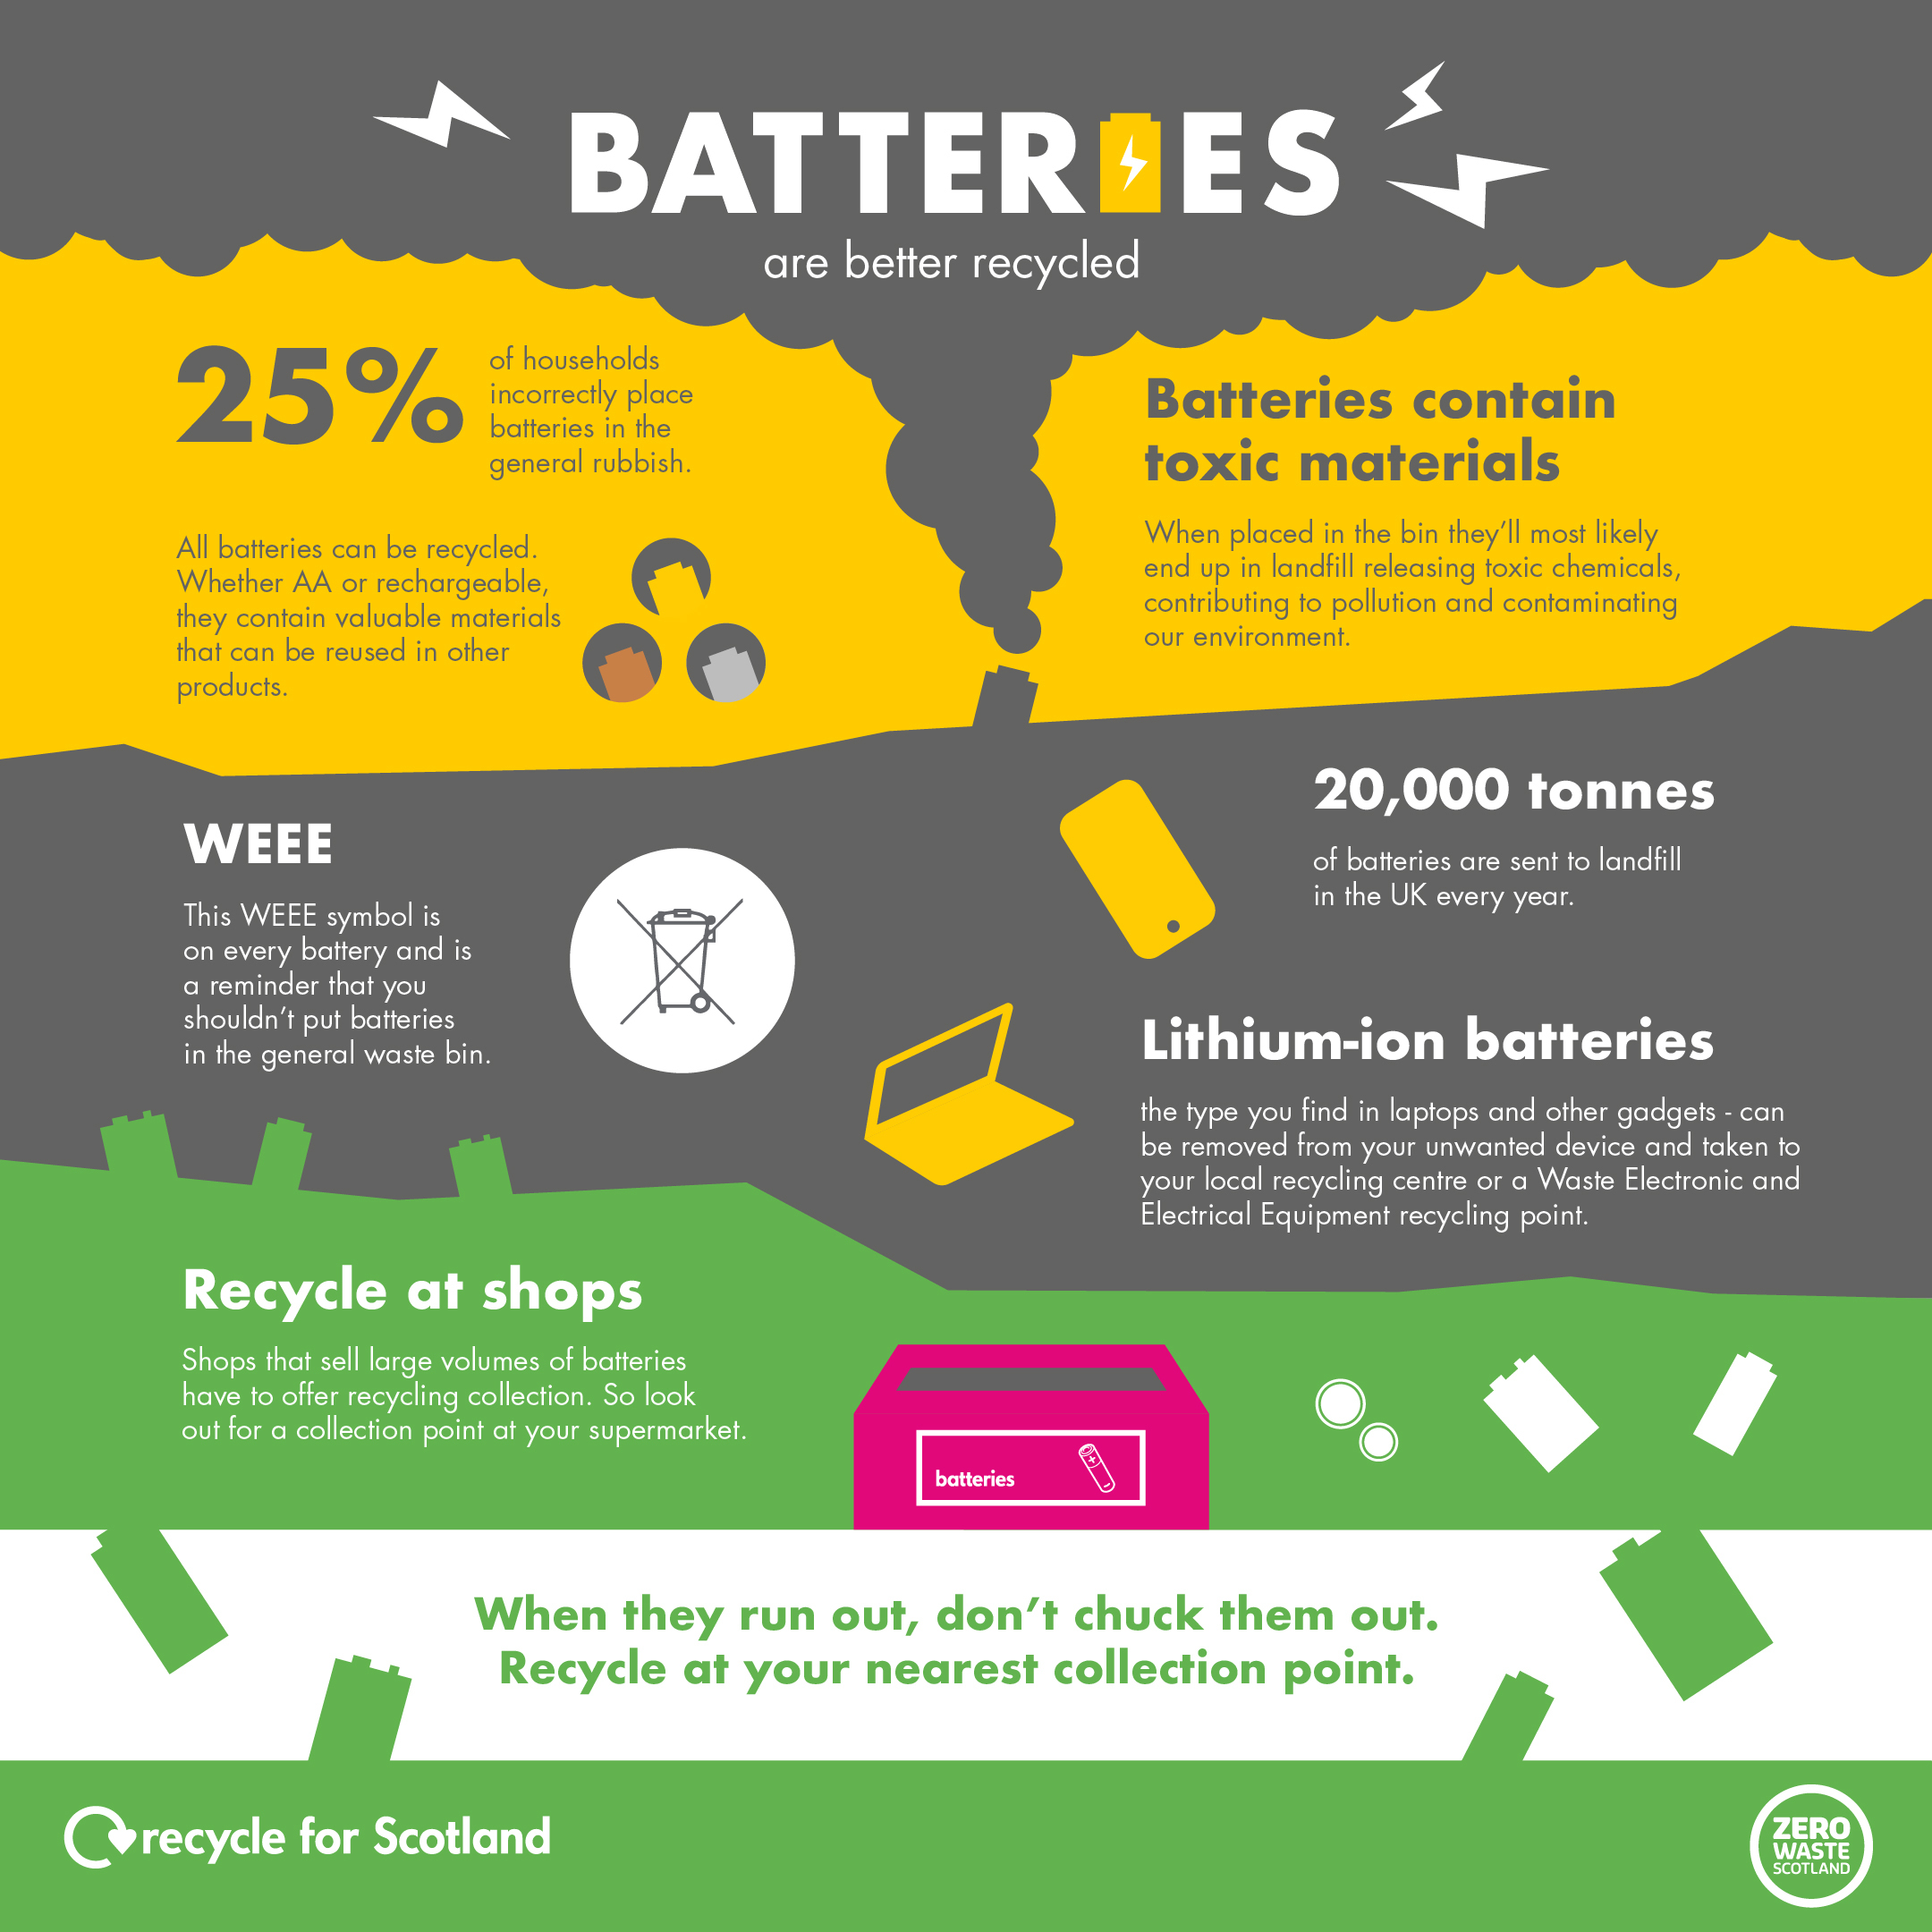 RFS Batteries are Better Recycled Infographic